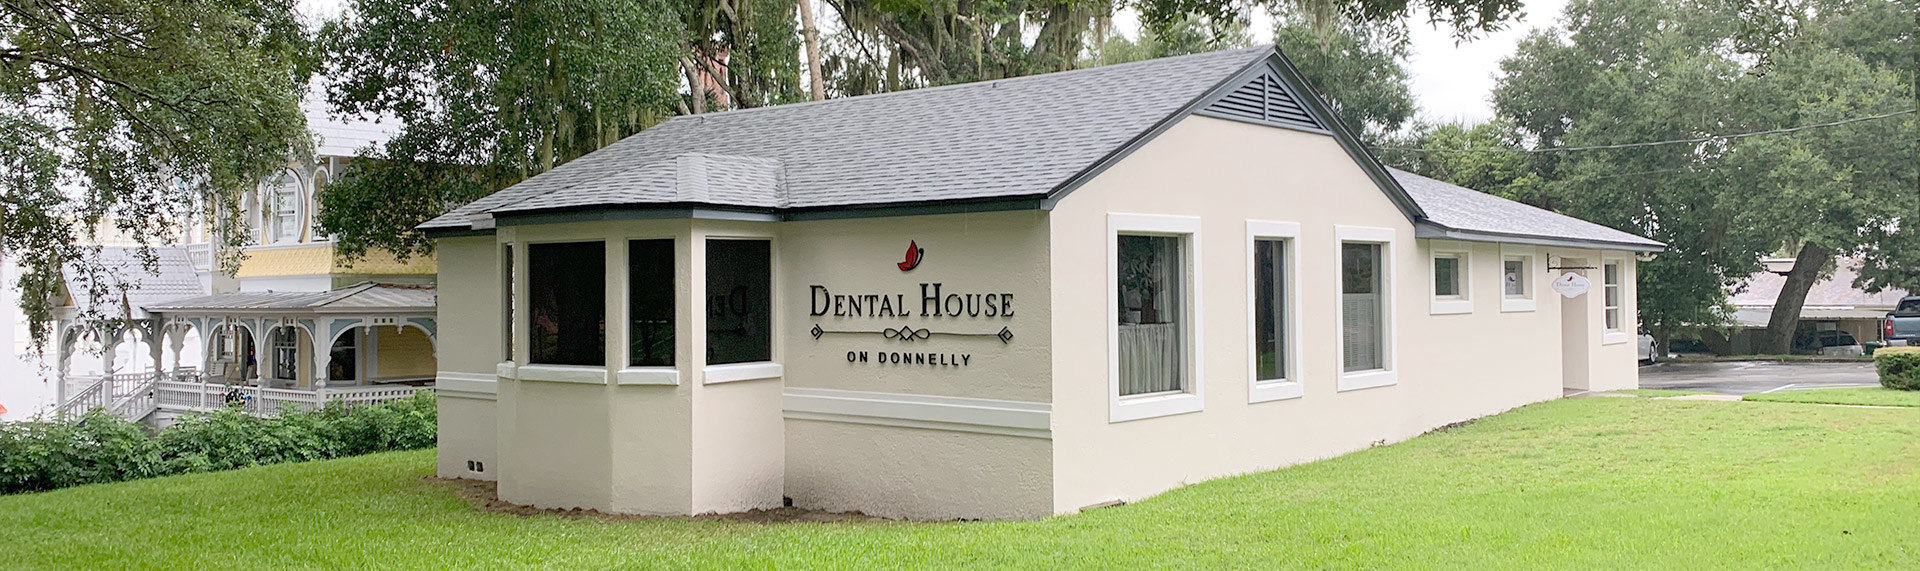 Map to Dental House on Donnelly Header Image